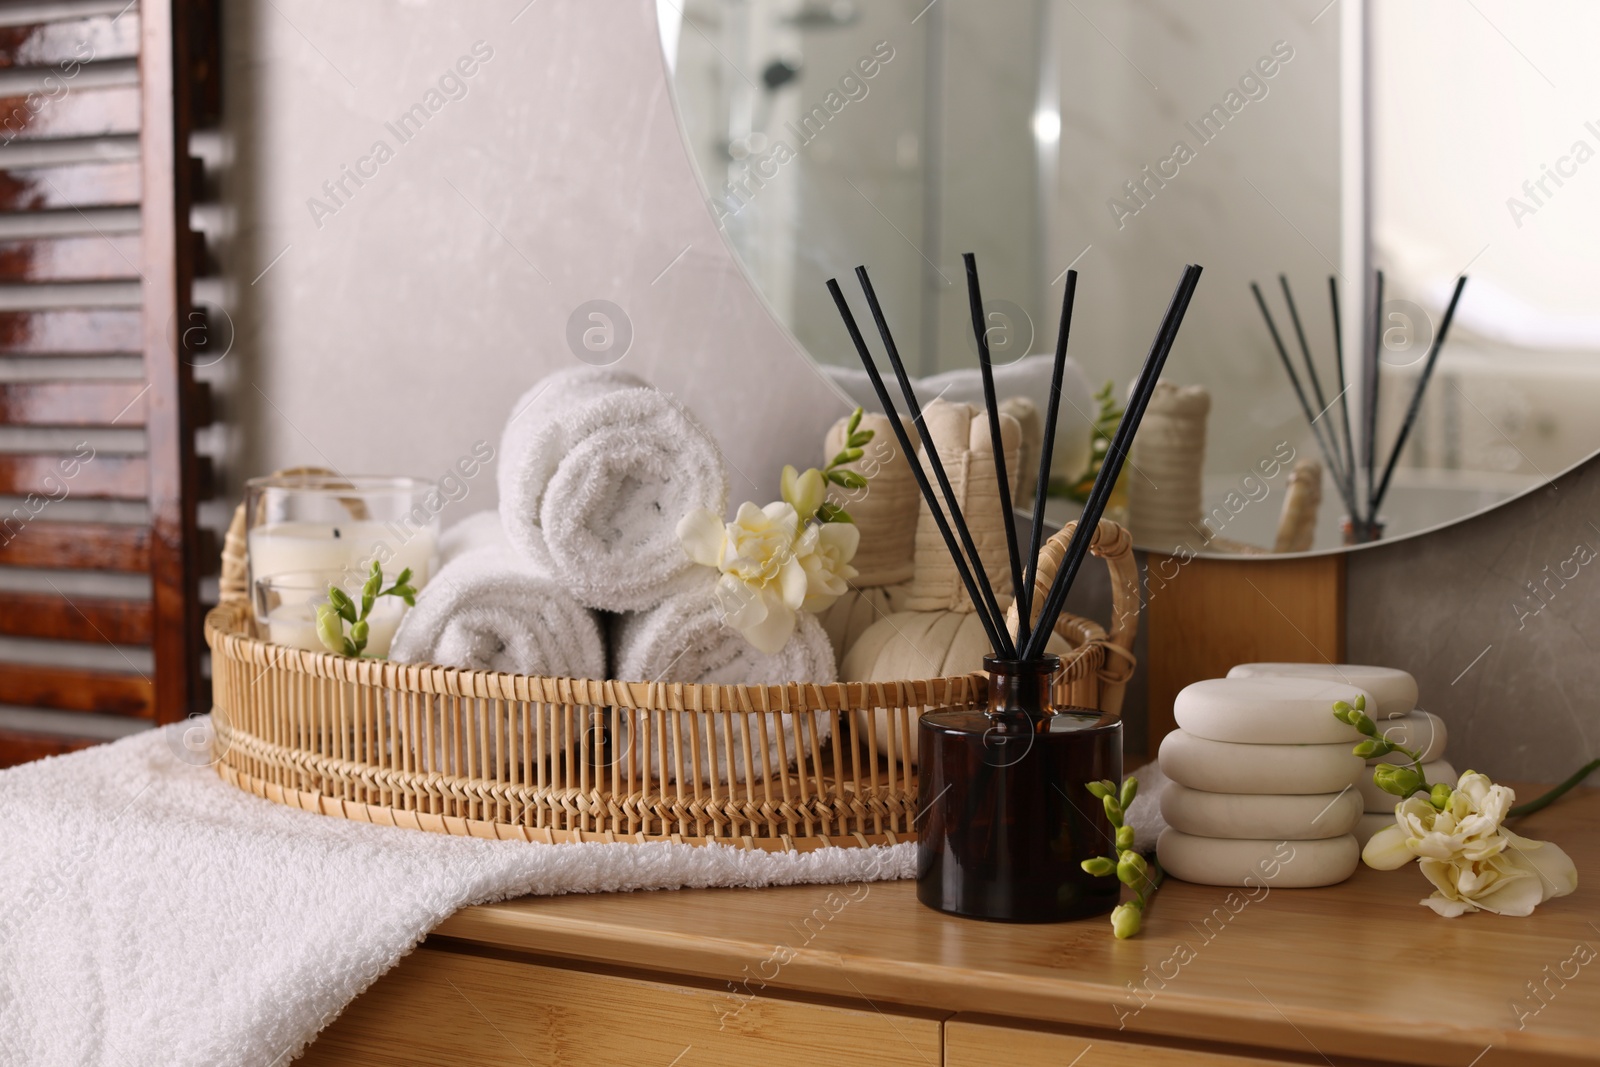 Photo of Aromatic reed air freshener, rolled towels and spa stones on wooden table indoors